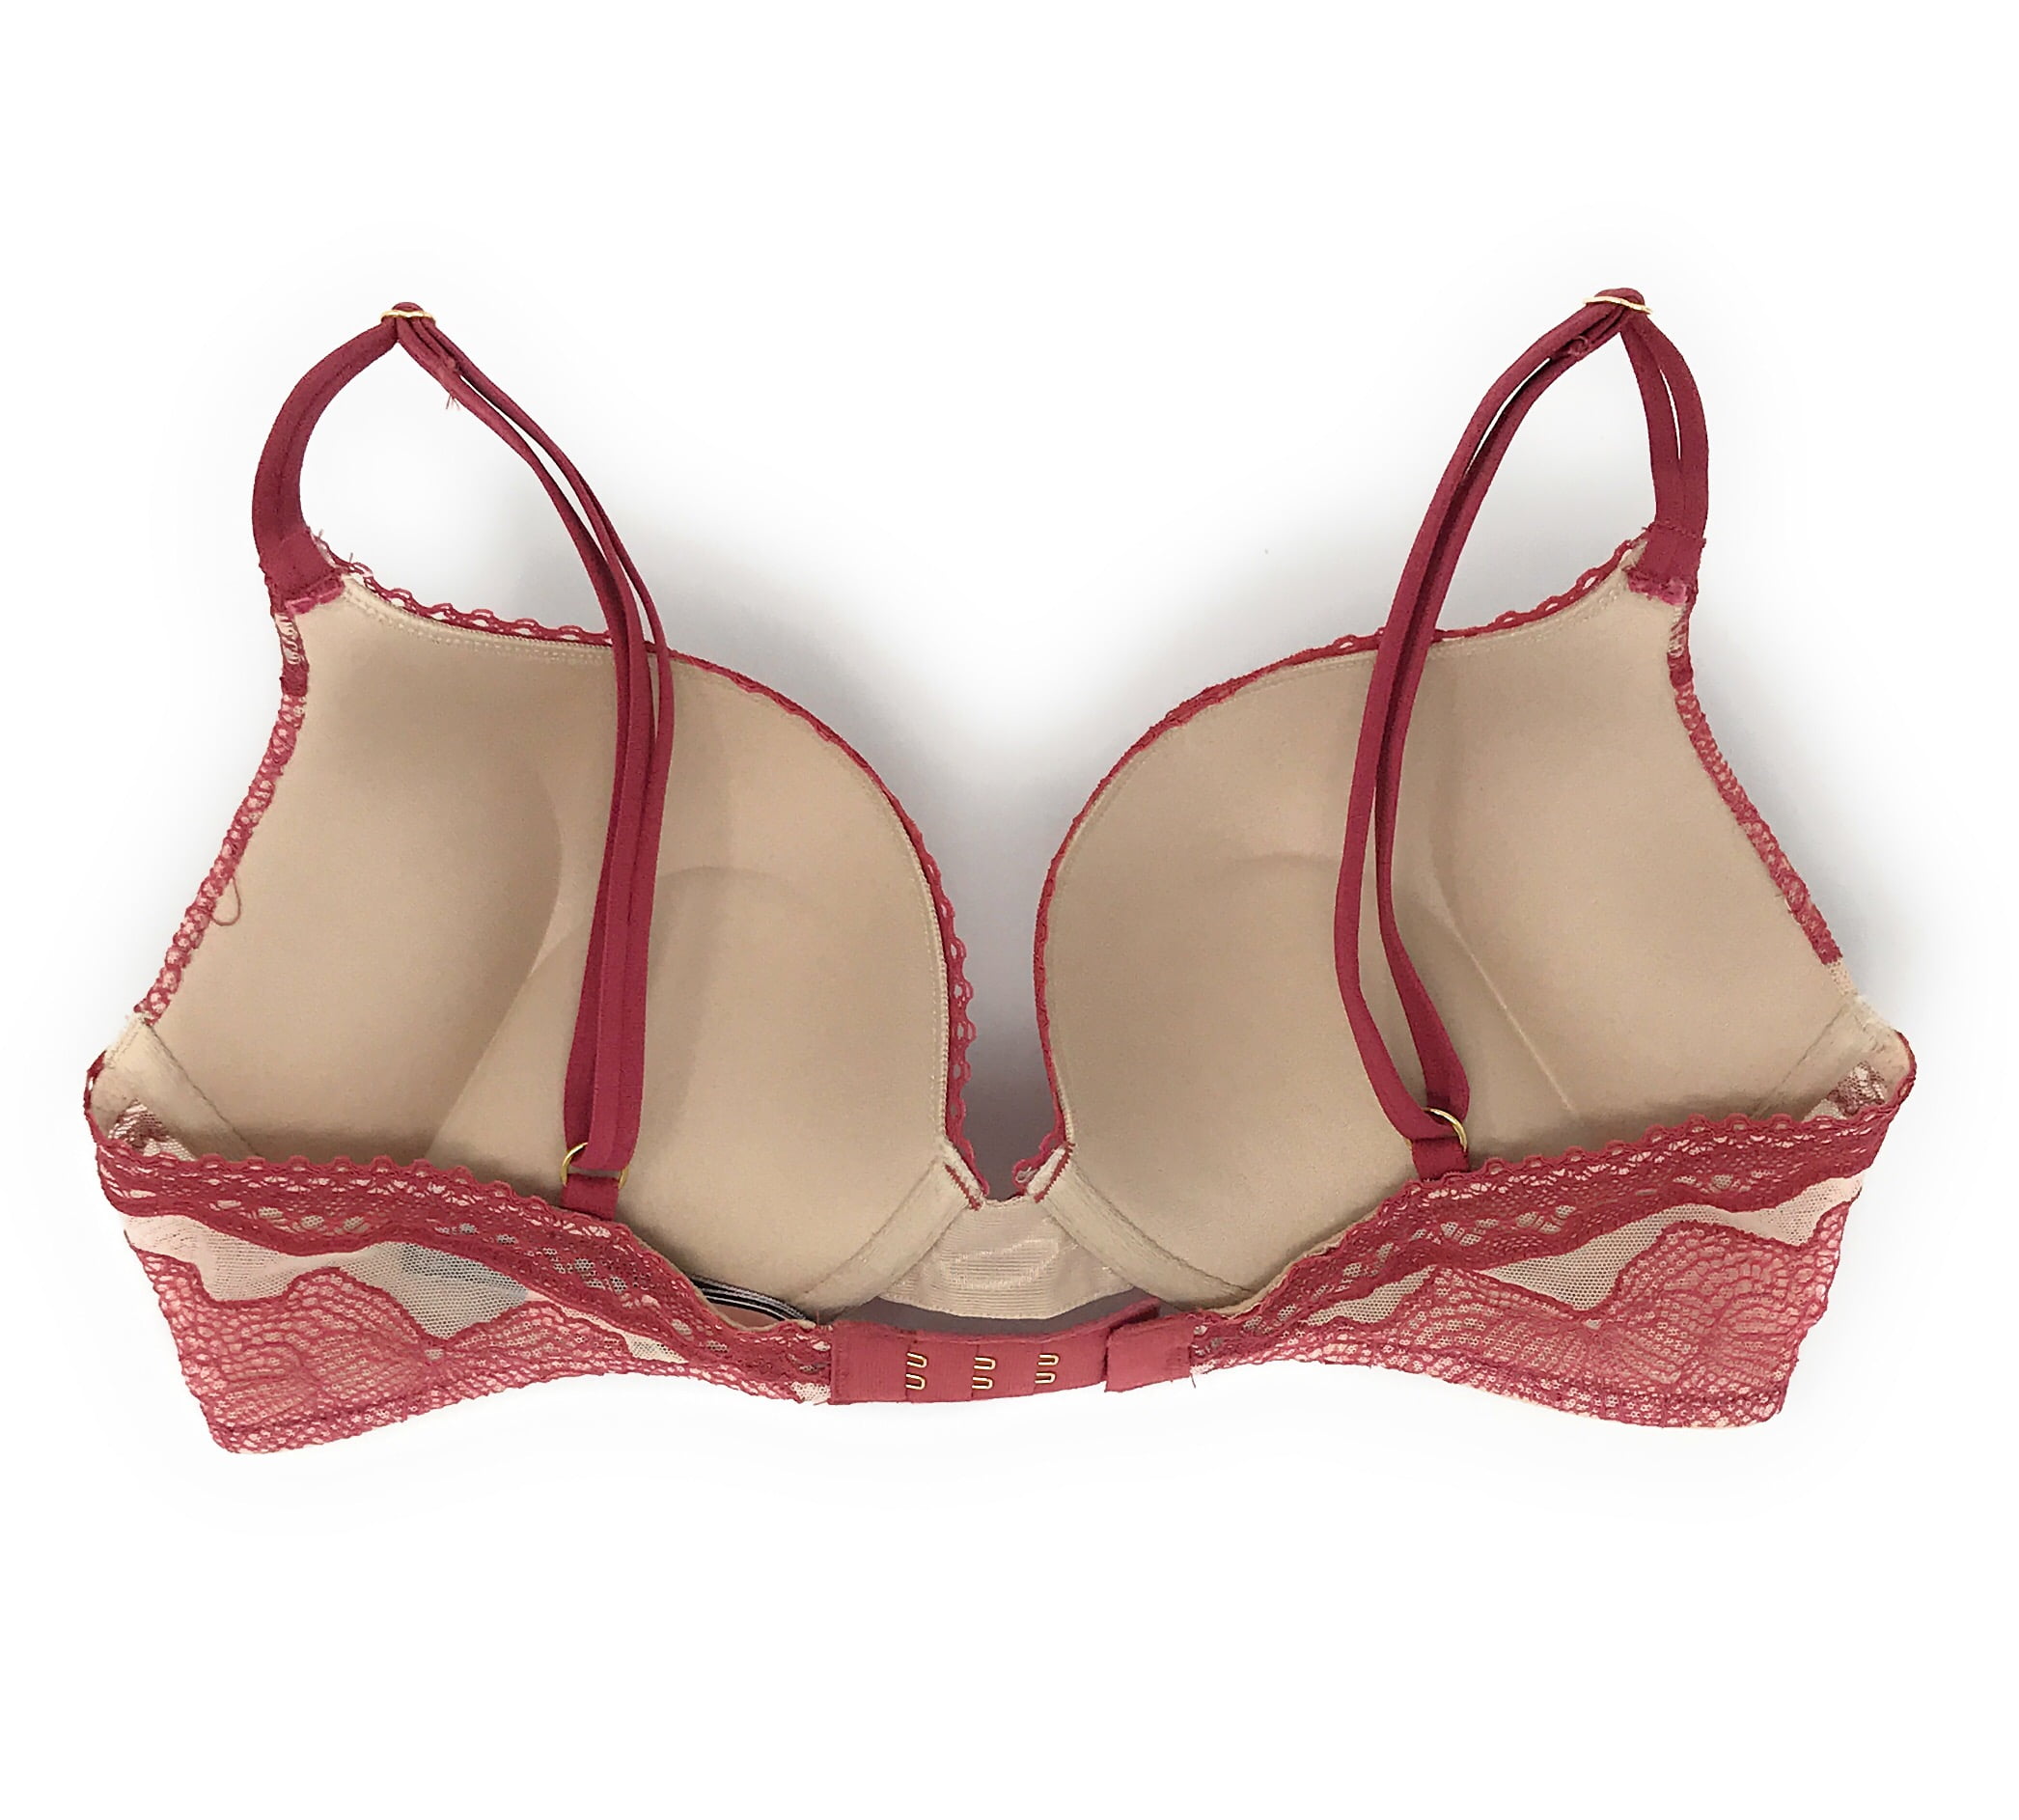 Buy Victoria's Secret Add 2 Cups Push Up Bombshell Bra from the Laura  Ashley online shop